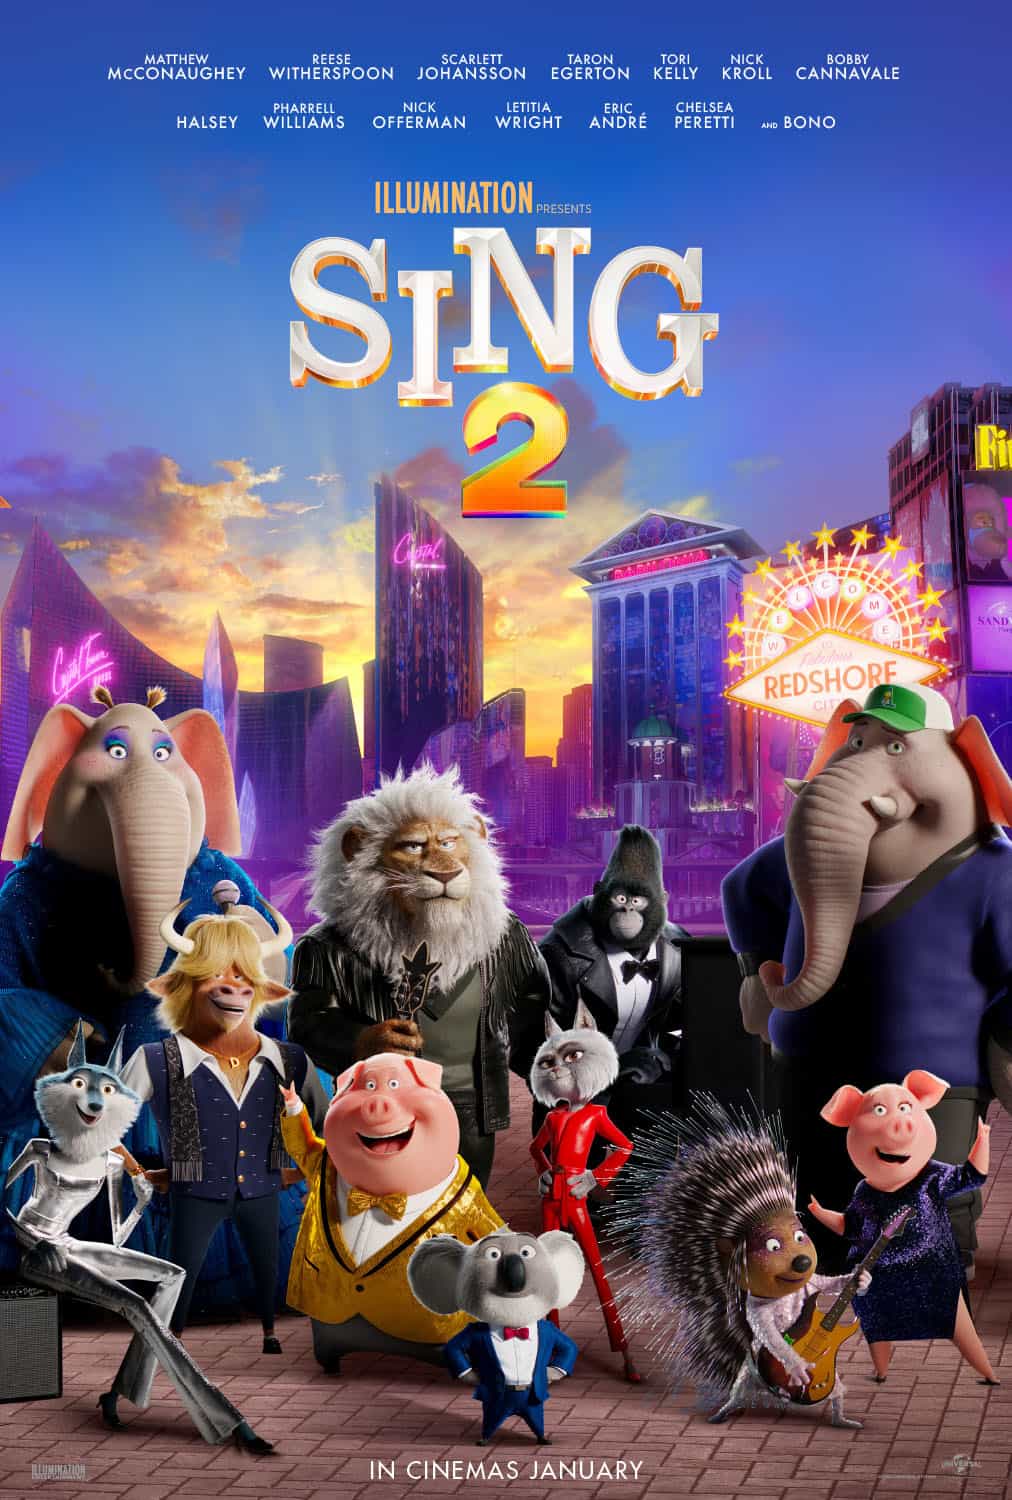 UK Box Office Weekend Report 4th - 6th February 2022: Sing 2 holds onto the UK box office top slot for a second weekend with Jackass Forever coming in at 2